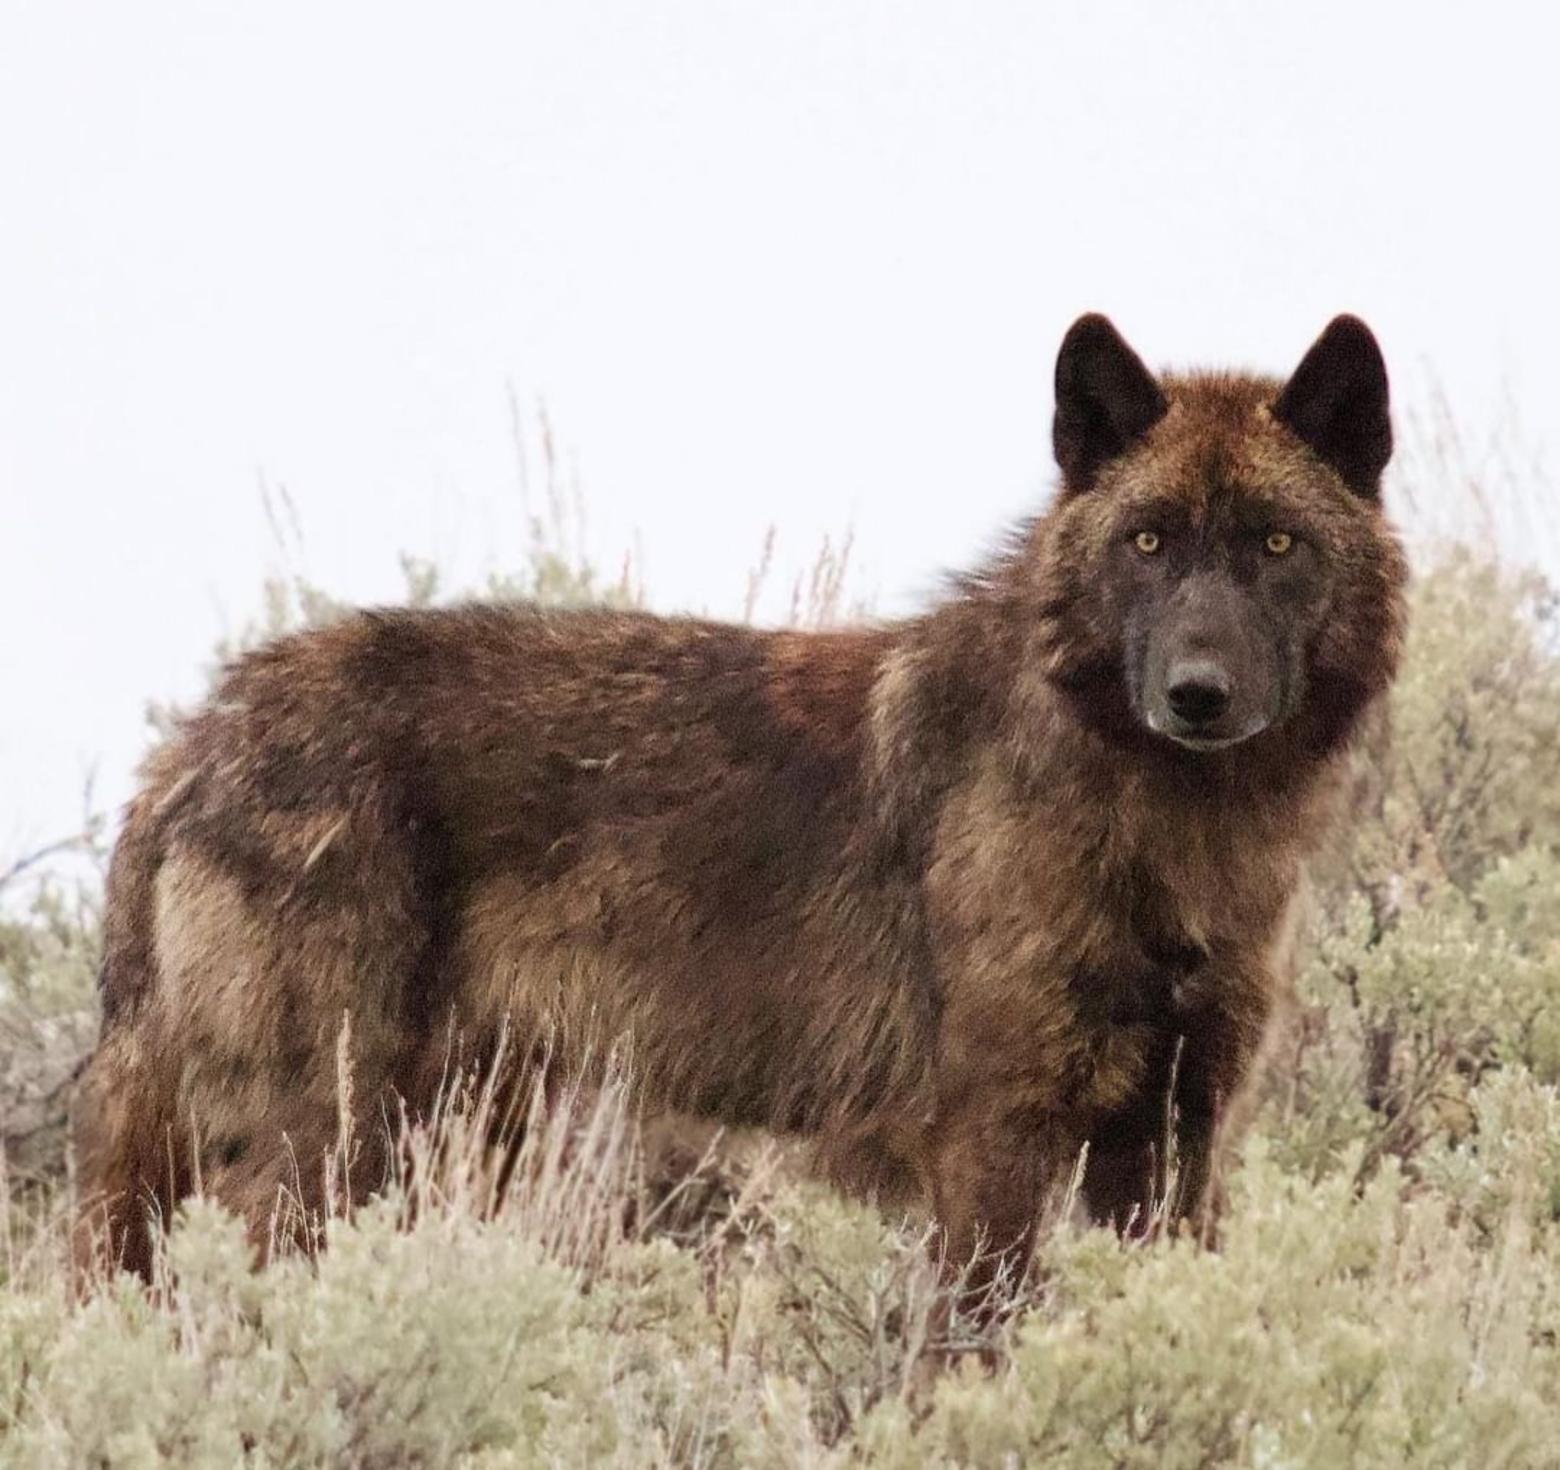 A gray wolf in Yellowstone National Park stares into photographer Ben Bluhm's lens. May 2022. Results from a recent survey indicate that tolerance for wolves among Montana residents is growing. Photo by Ben Bluhm